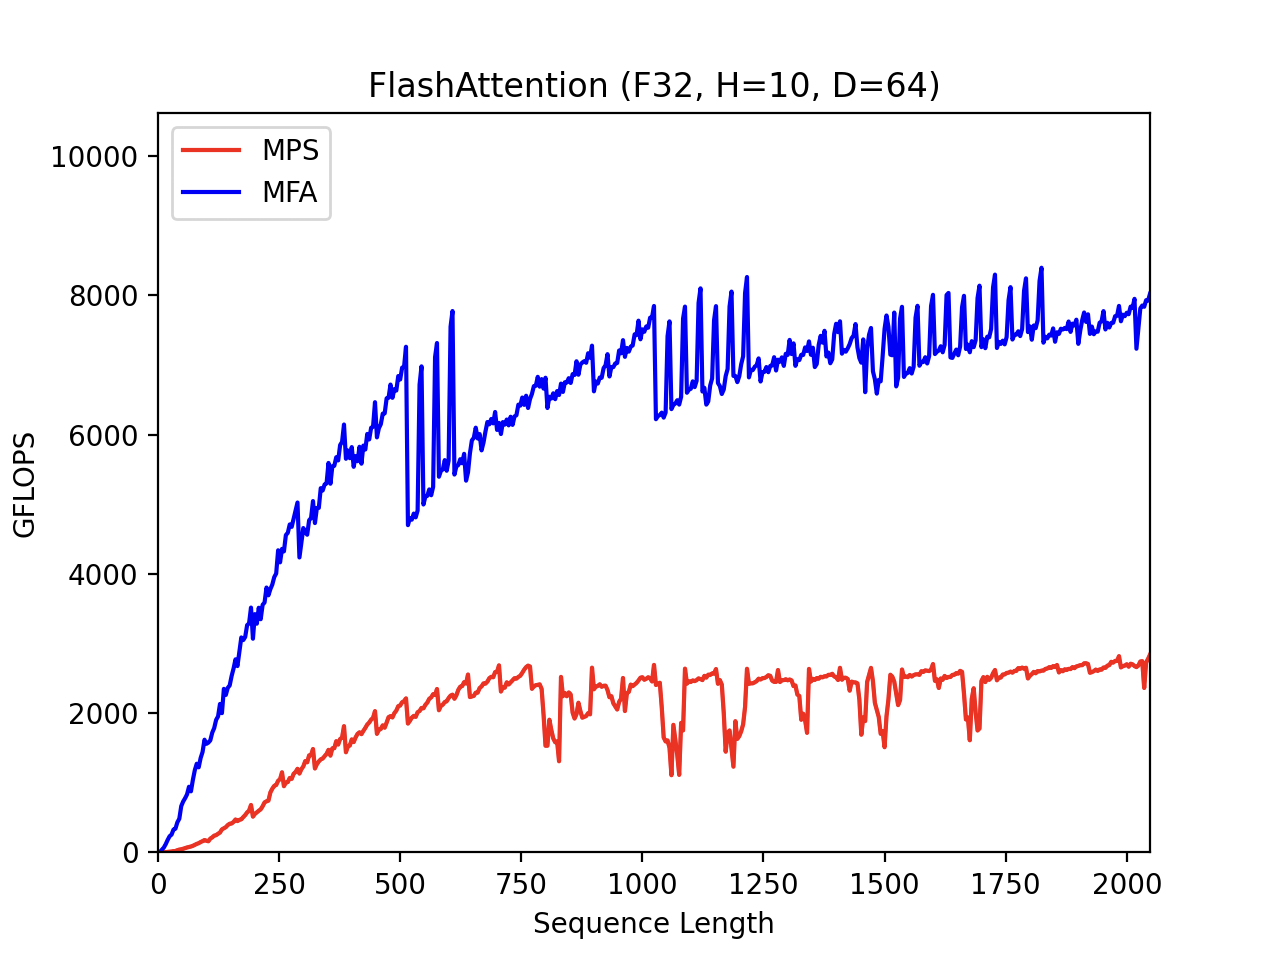 FlashAttention (F32, H=10, D=64)